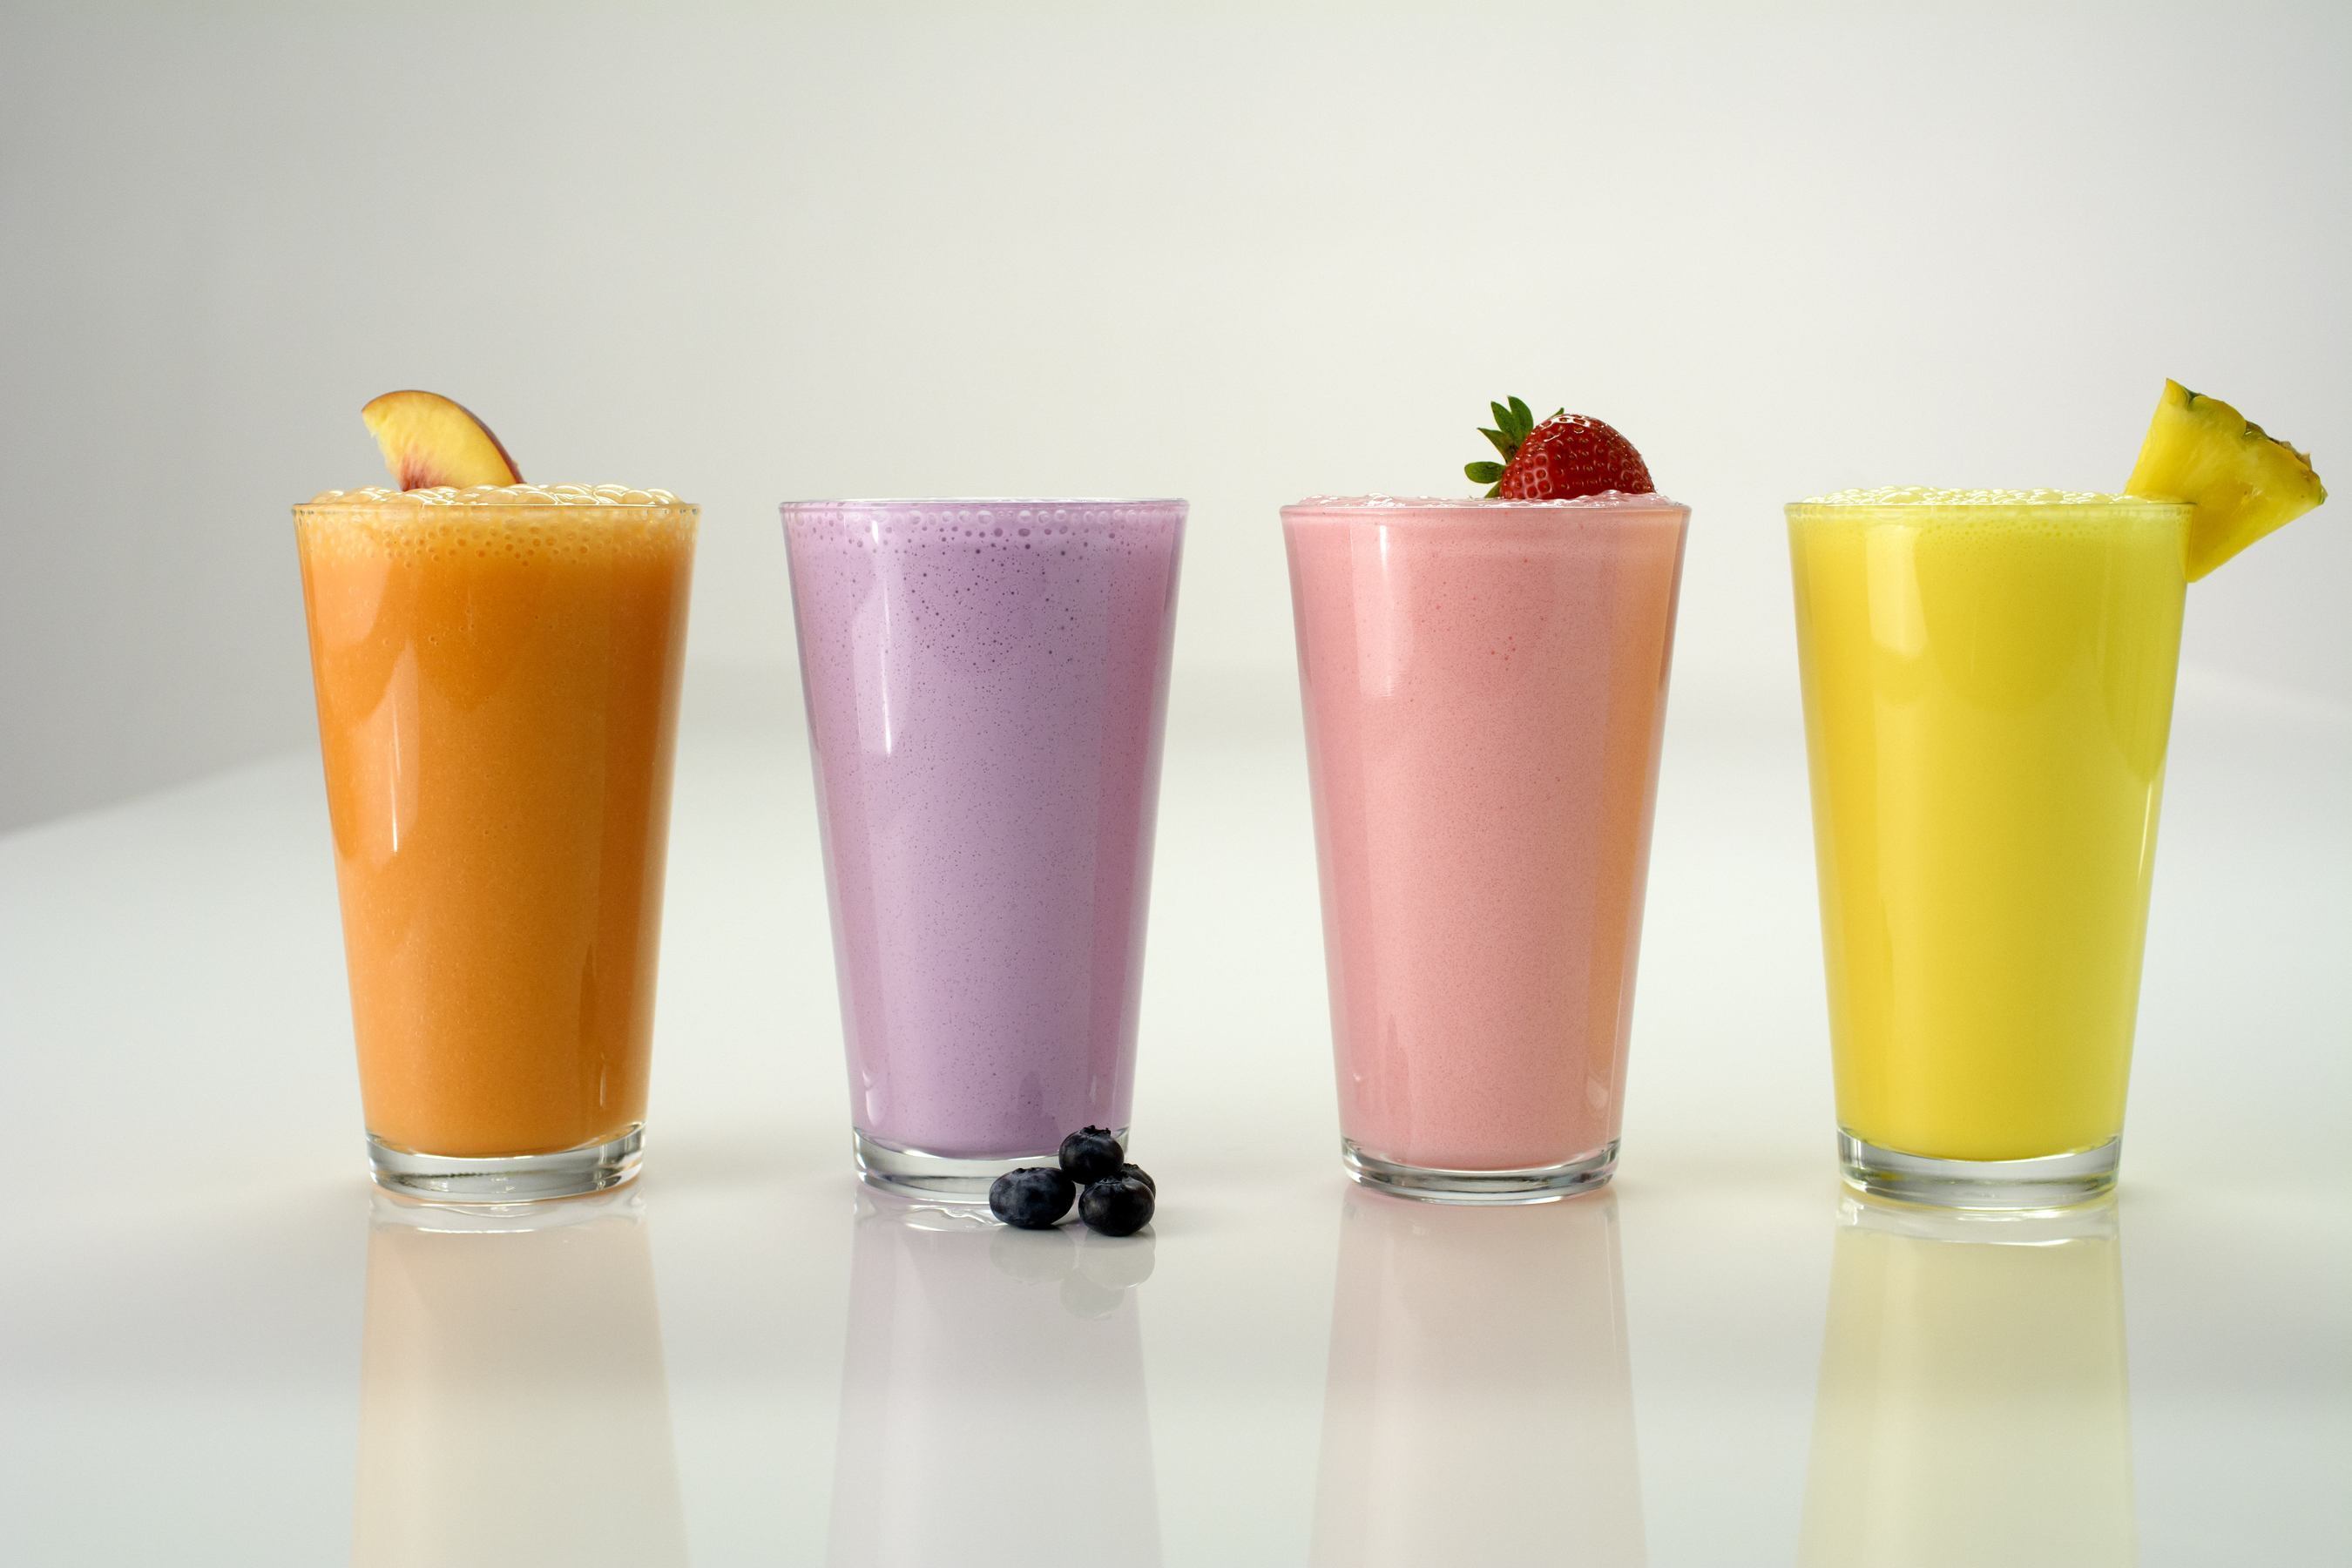 Just in time for summer, Nutrisystem introduces nutritious Fruit Smoothies in four flavors - Tropical Fruit, Blueberry Burst, Strawberry Banana and Peach Mango. Each smoothie counts as a full serving of fruit and is packed with vitamin C, calcium and fiber. The smoothies are also low in fat, sodium and cholesterol. (PRNewsFoto/Nutrisystem, Inc.) (PRNewsFoto/Nutrisystem, Inc.)